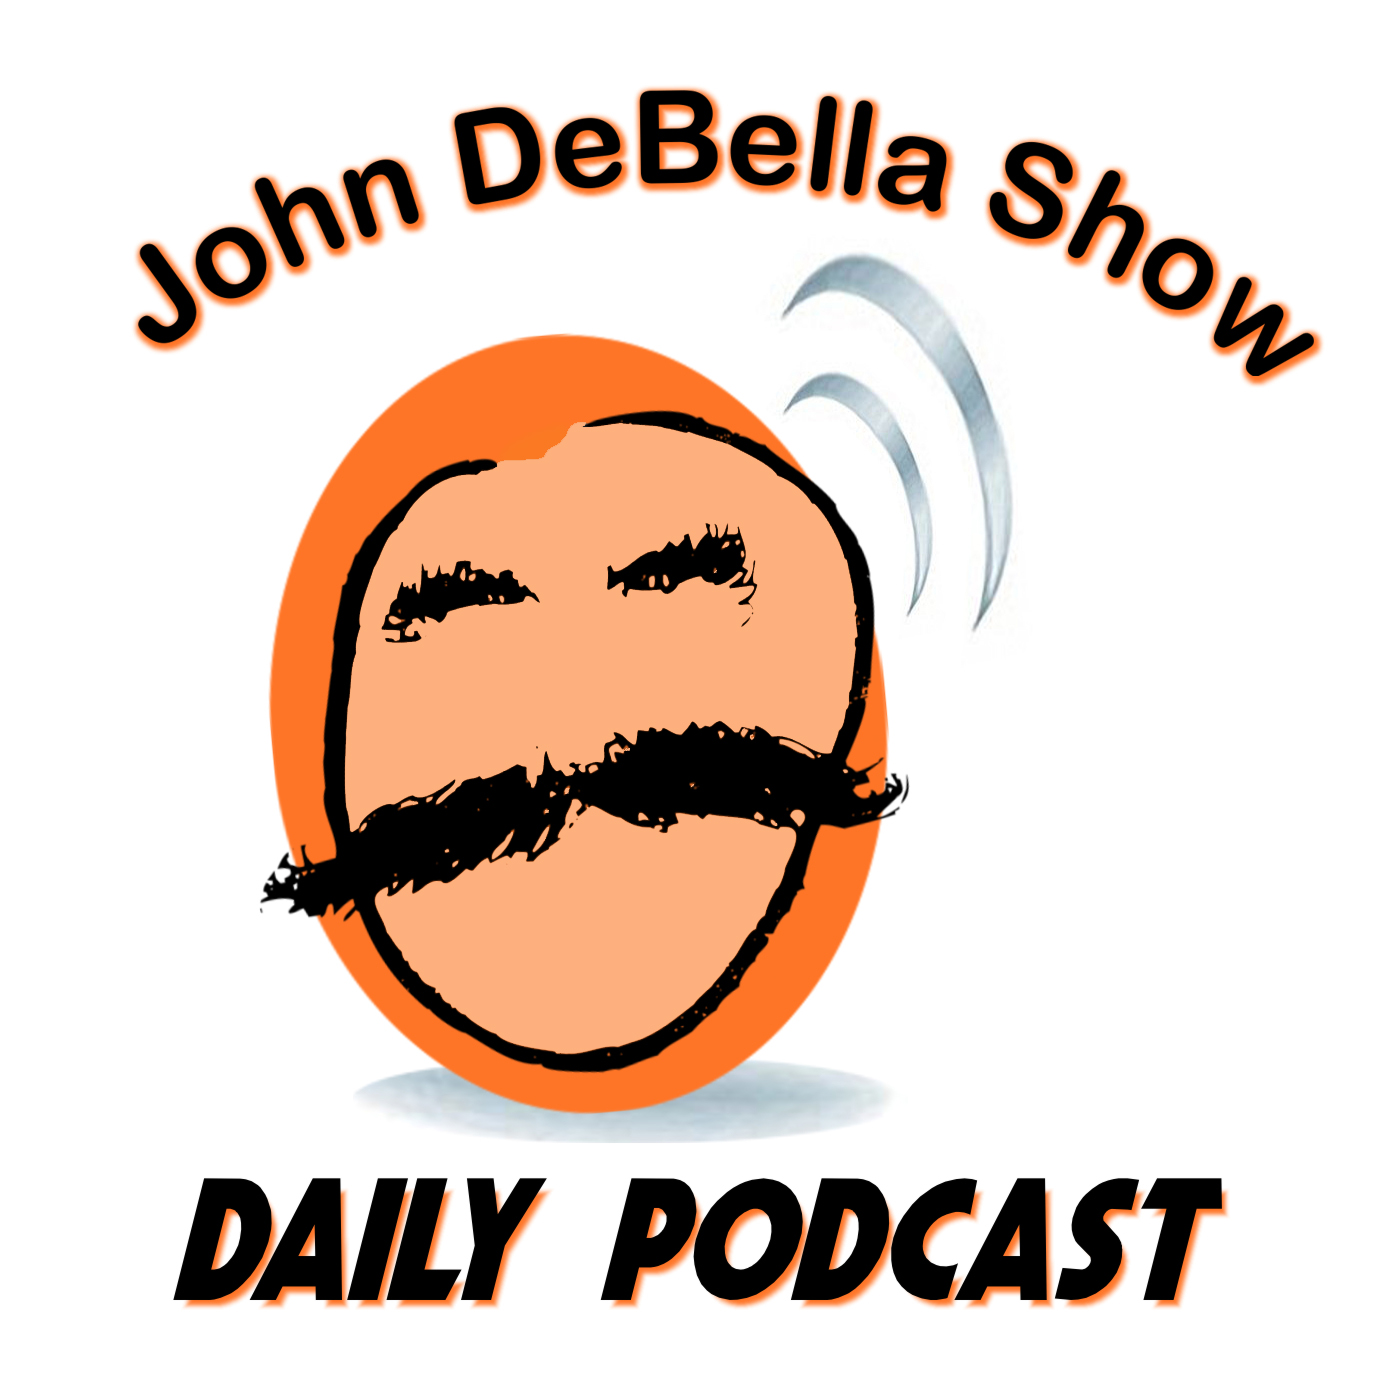 The Daily Podcast (06/14/21)